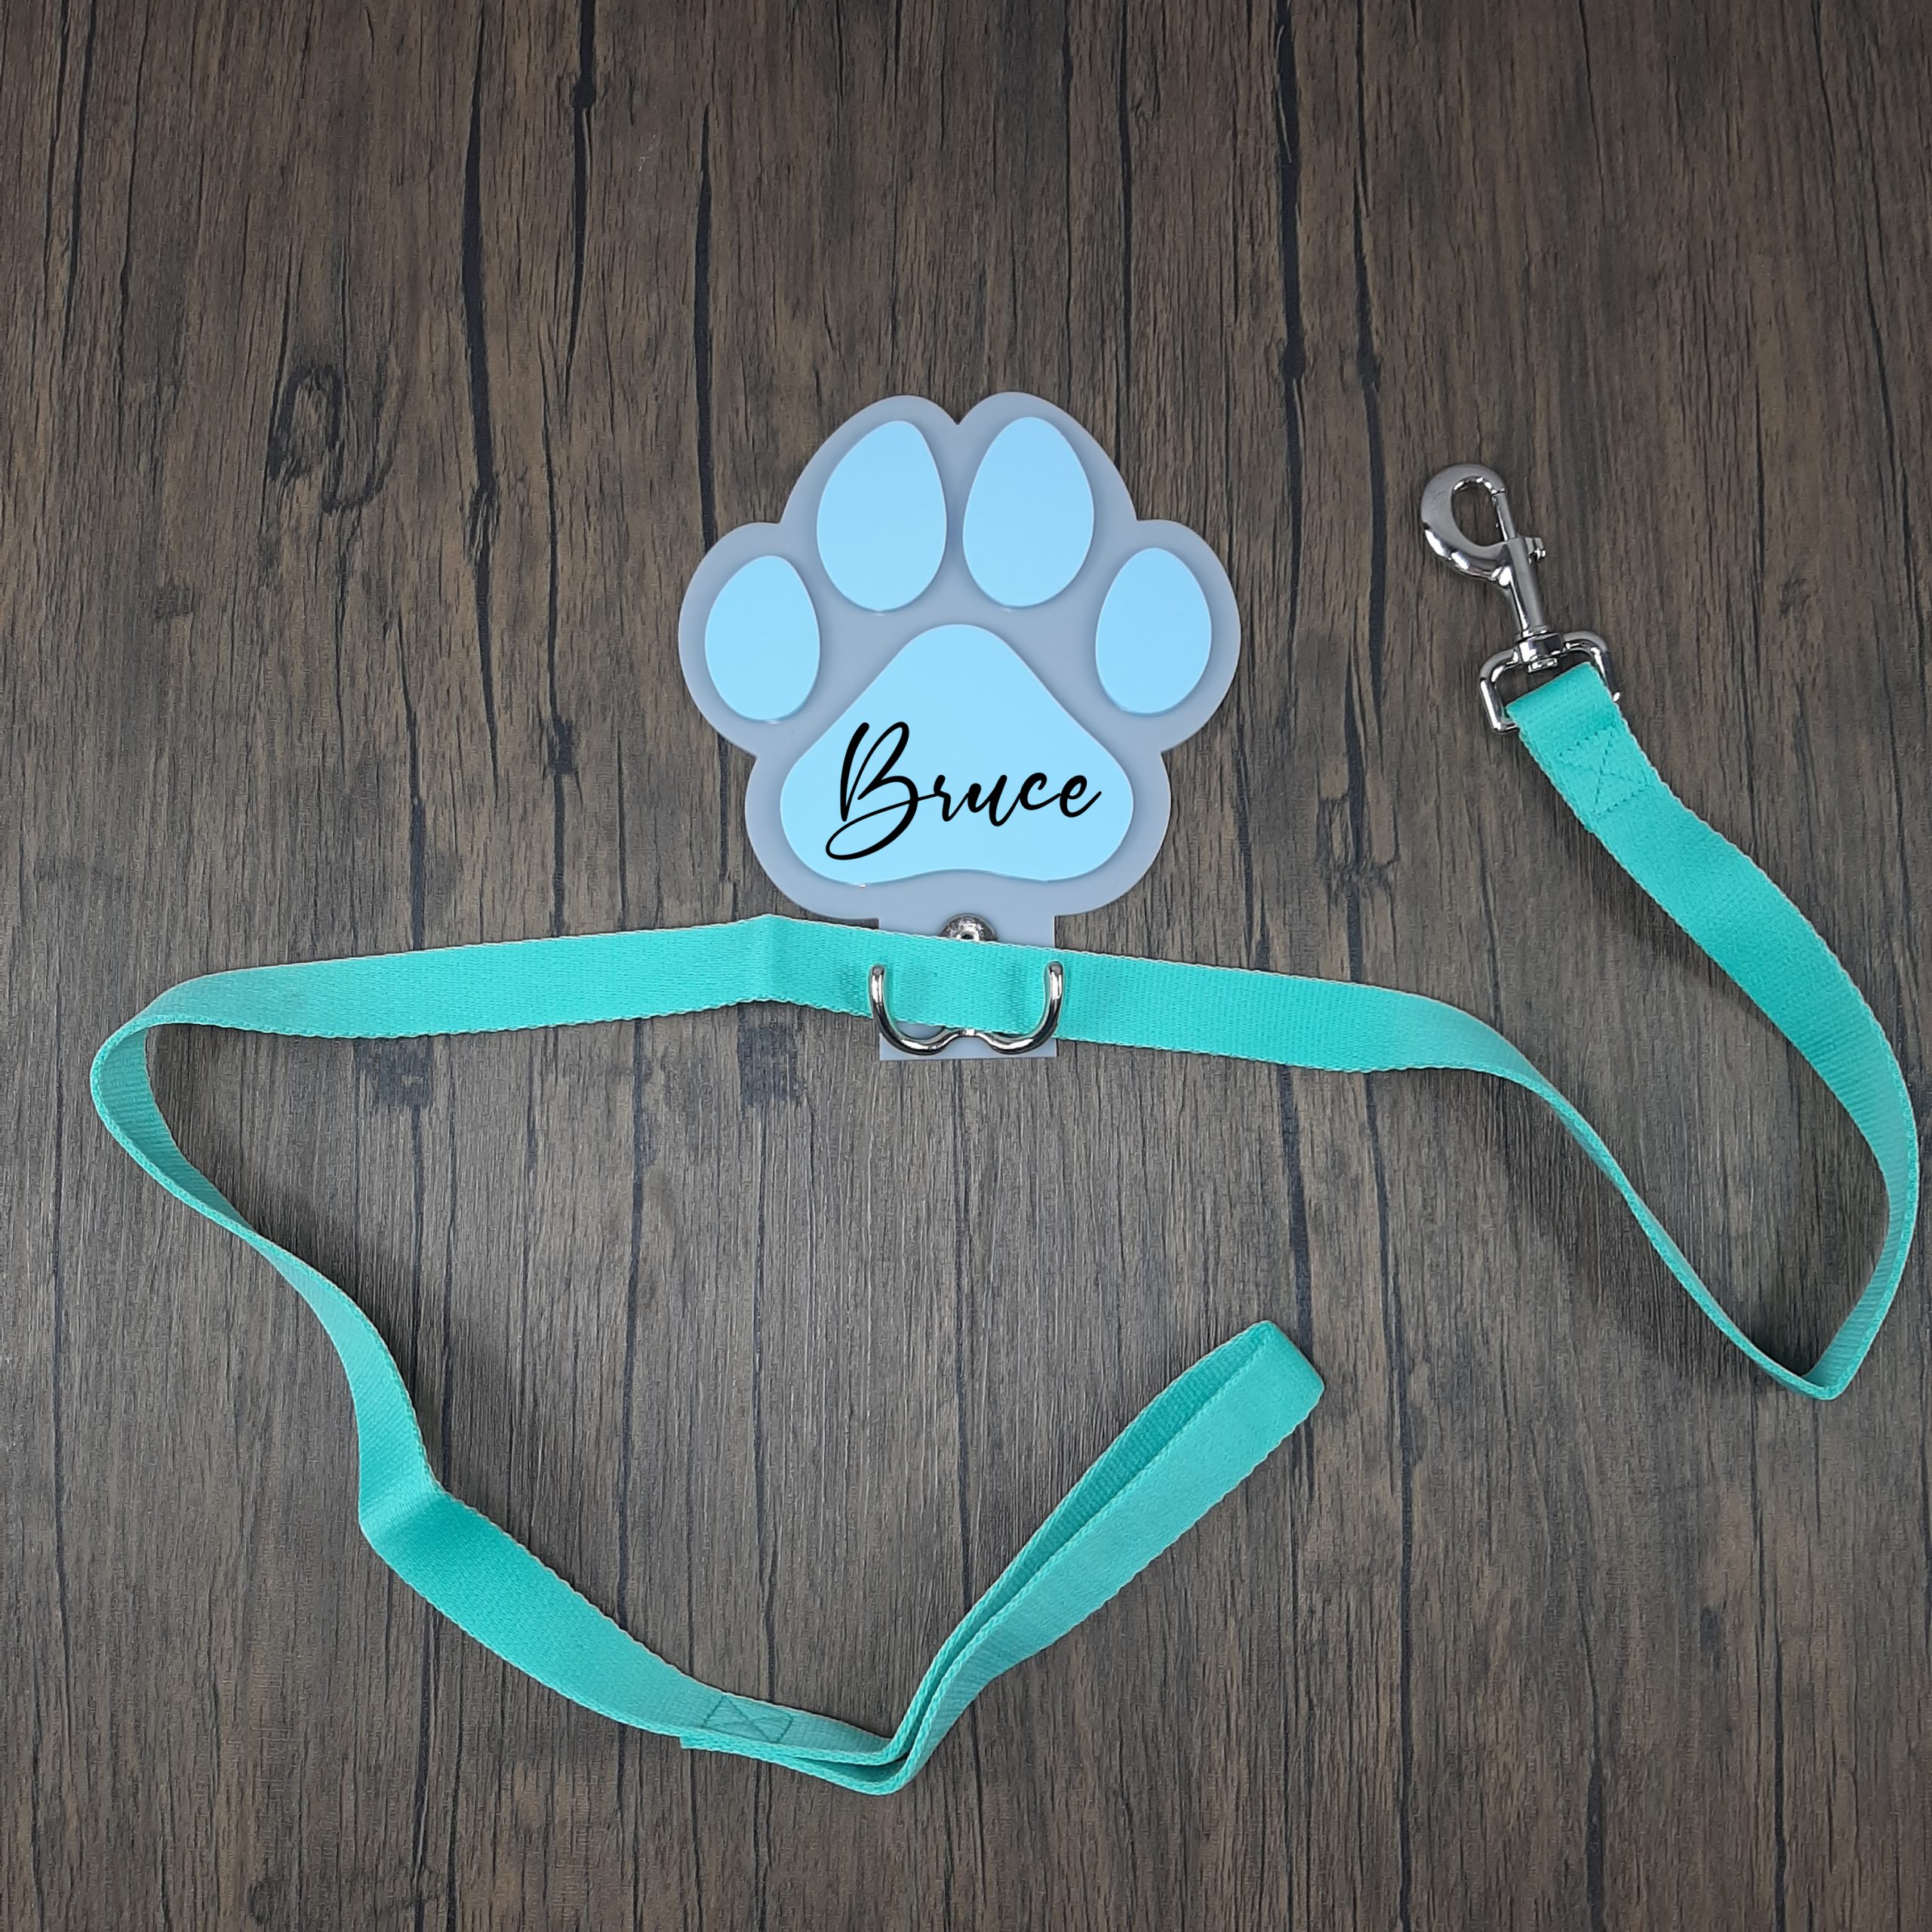 Dog lead hanger in blue and grey with name personalised on for any dog lover